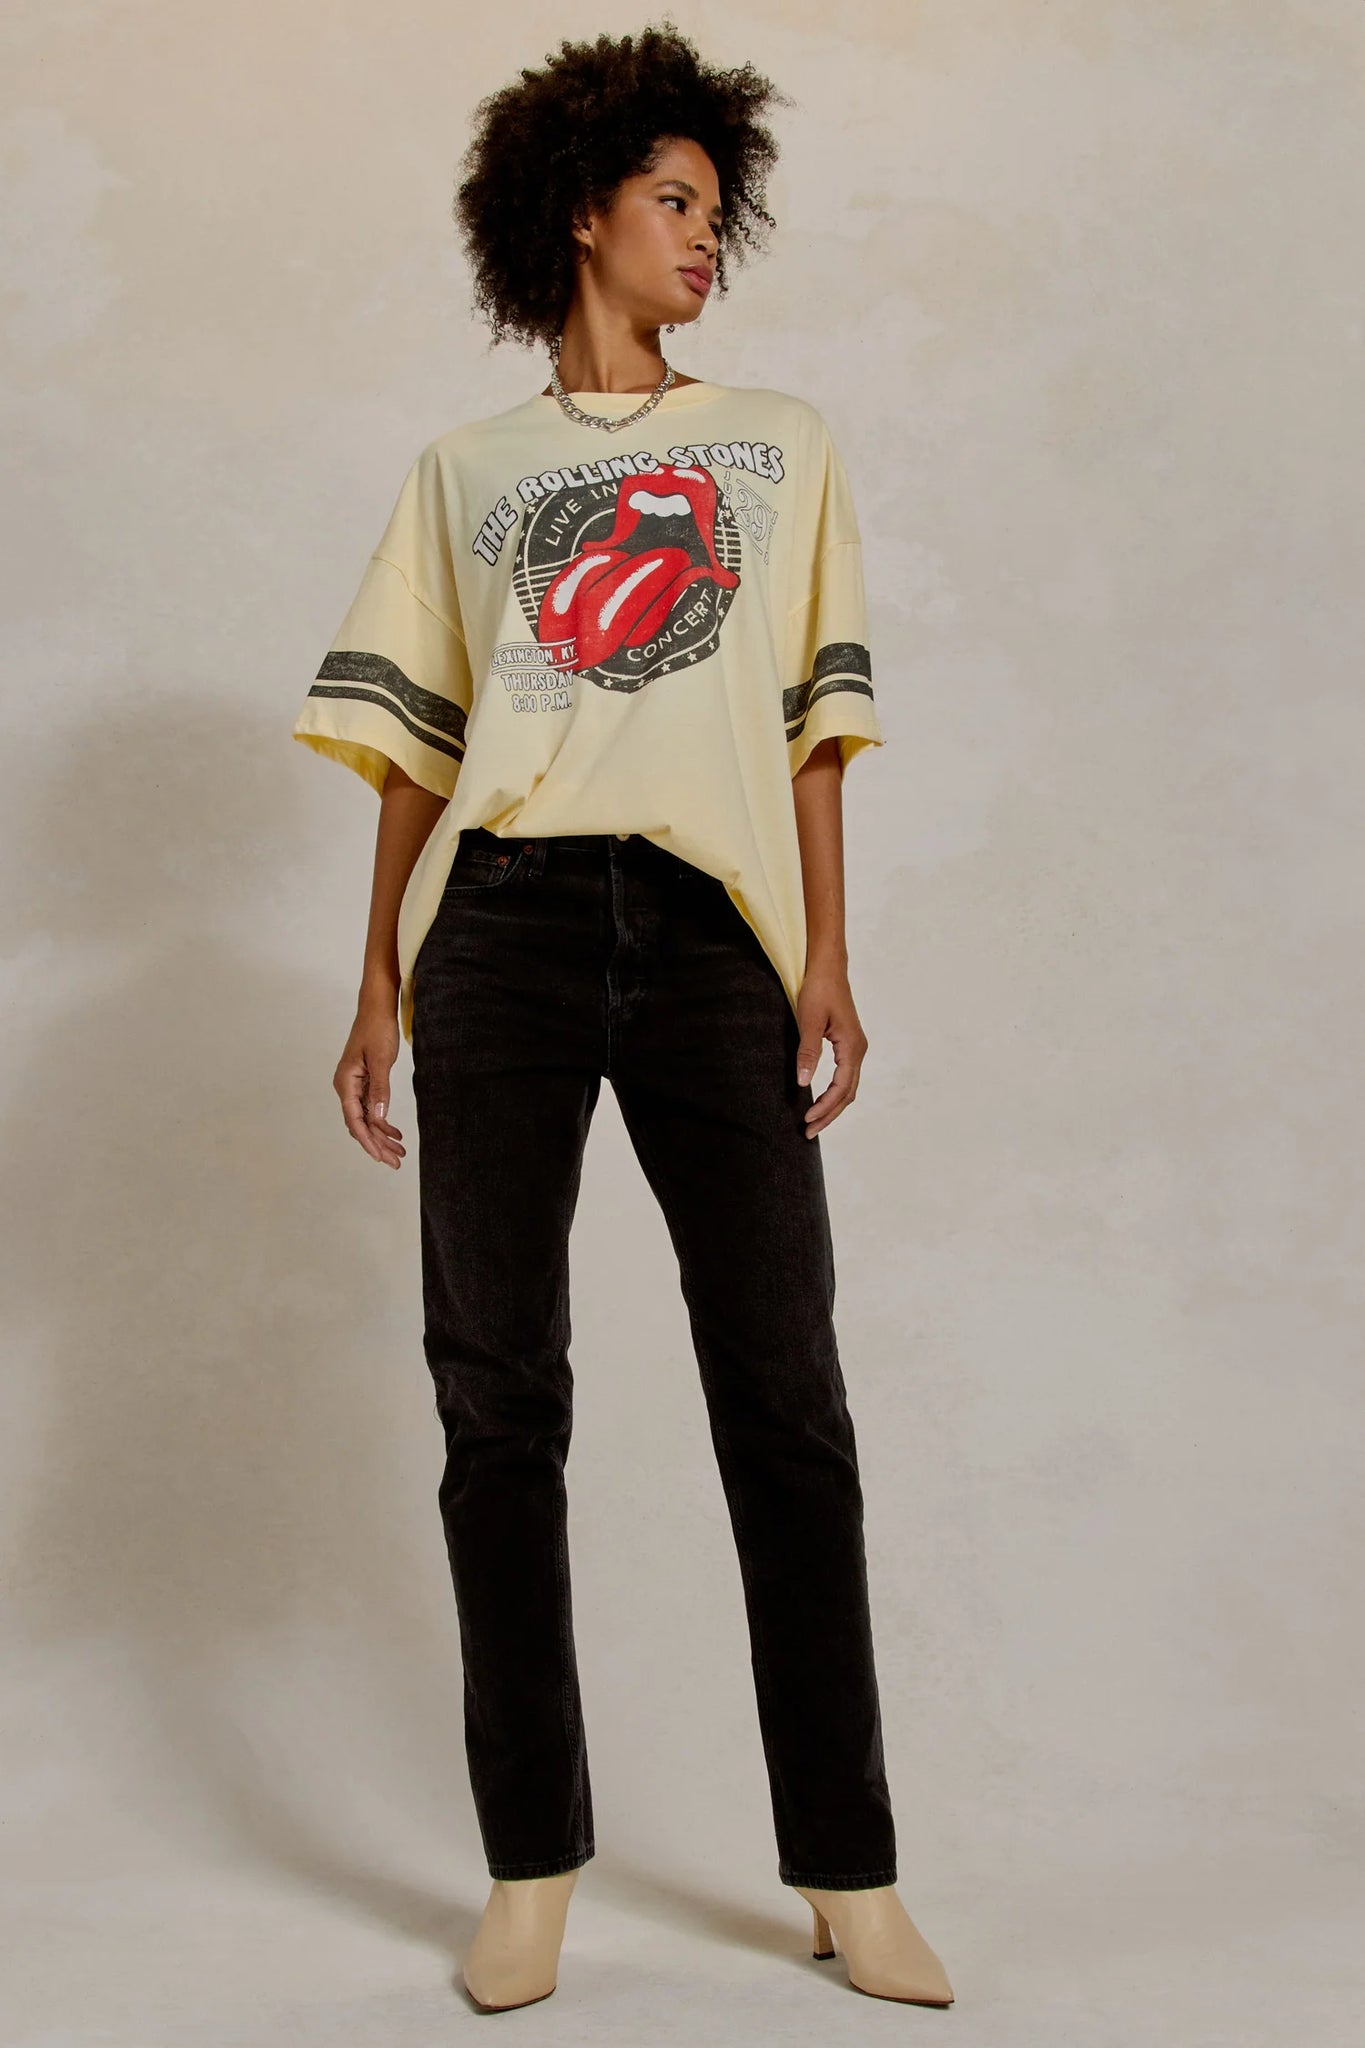 Rolling Stones Concert Stamp OS Tee